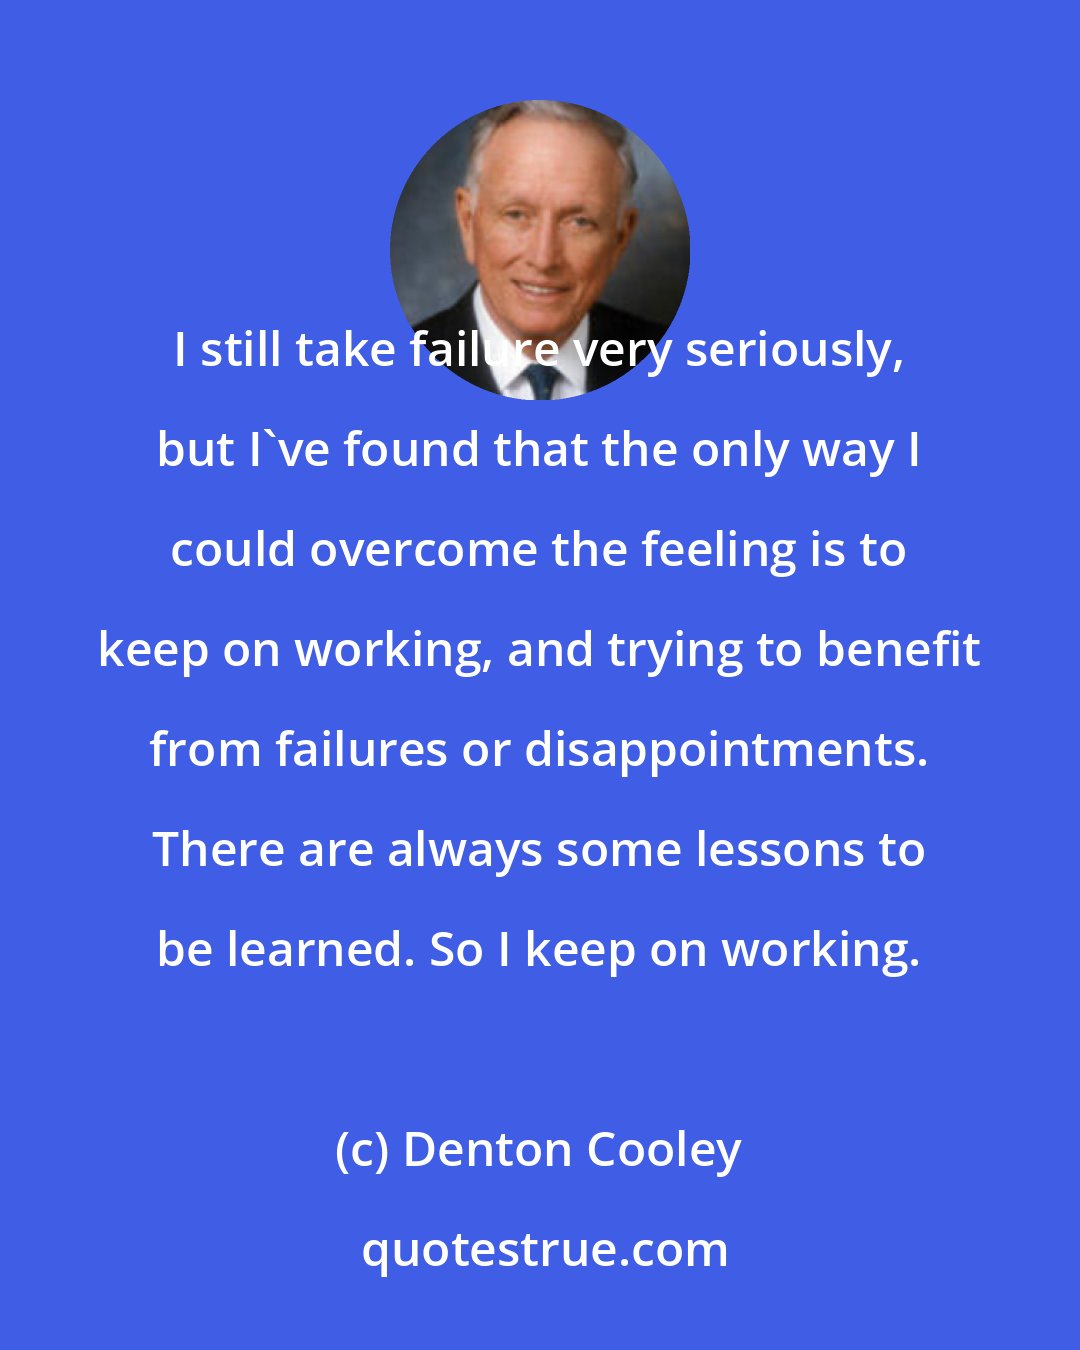 Denton Cooley: I still take failure very seriously, but I've found that the only way I could overcome the feeling is to keep on working, and trying to benefit from failures or disappointments. There are always some lessons to be learned. So I keep on working.